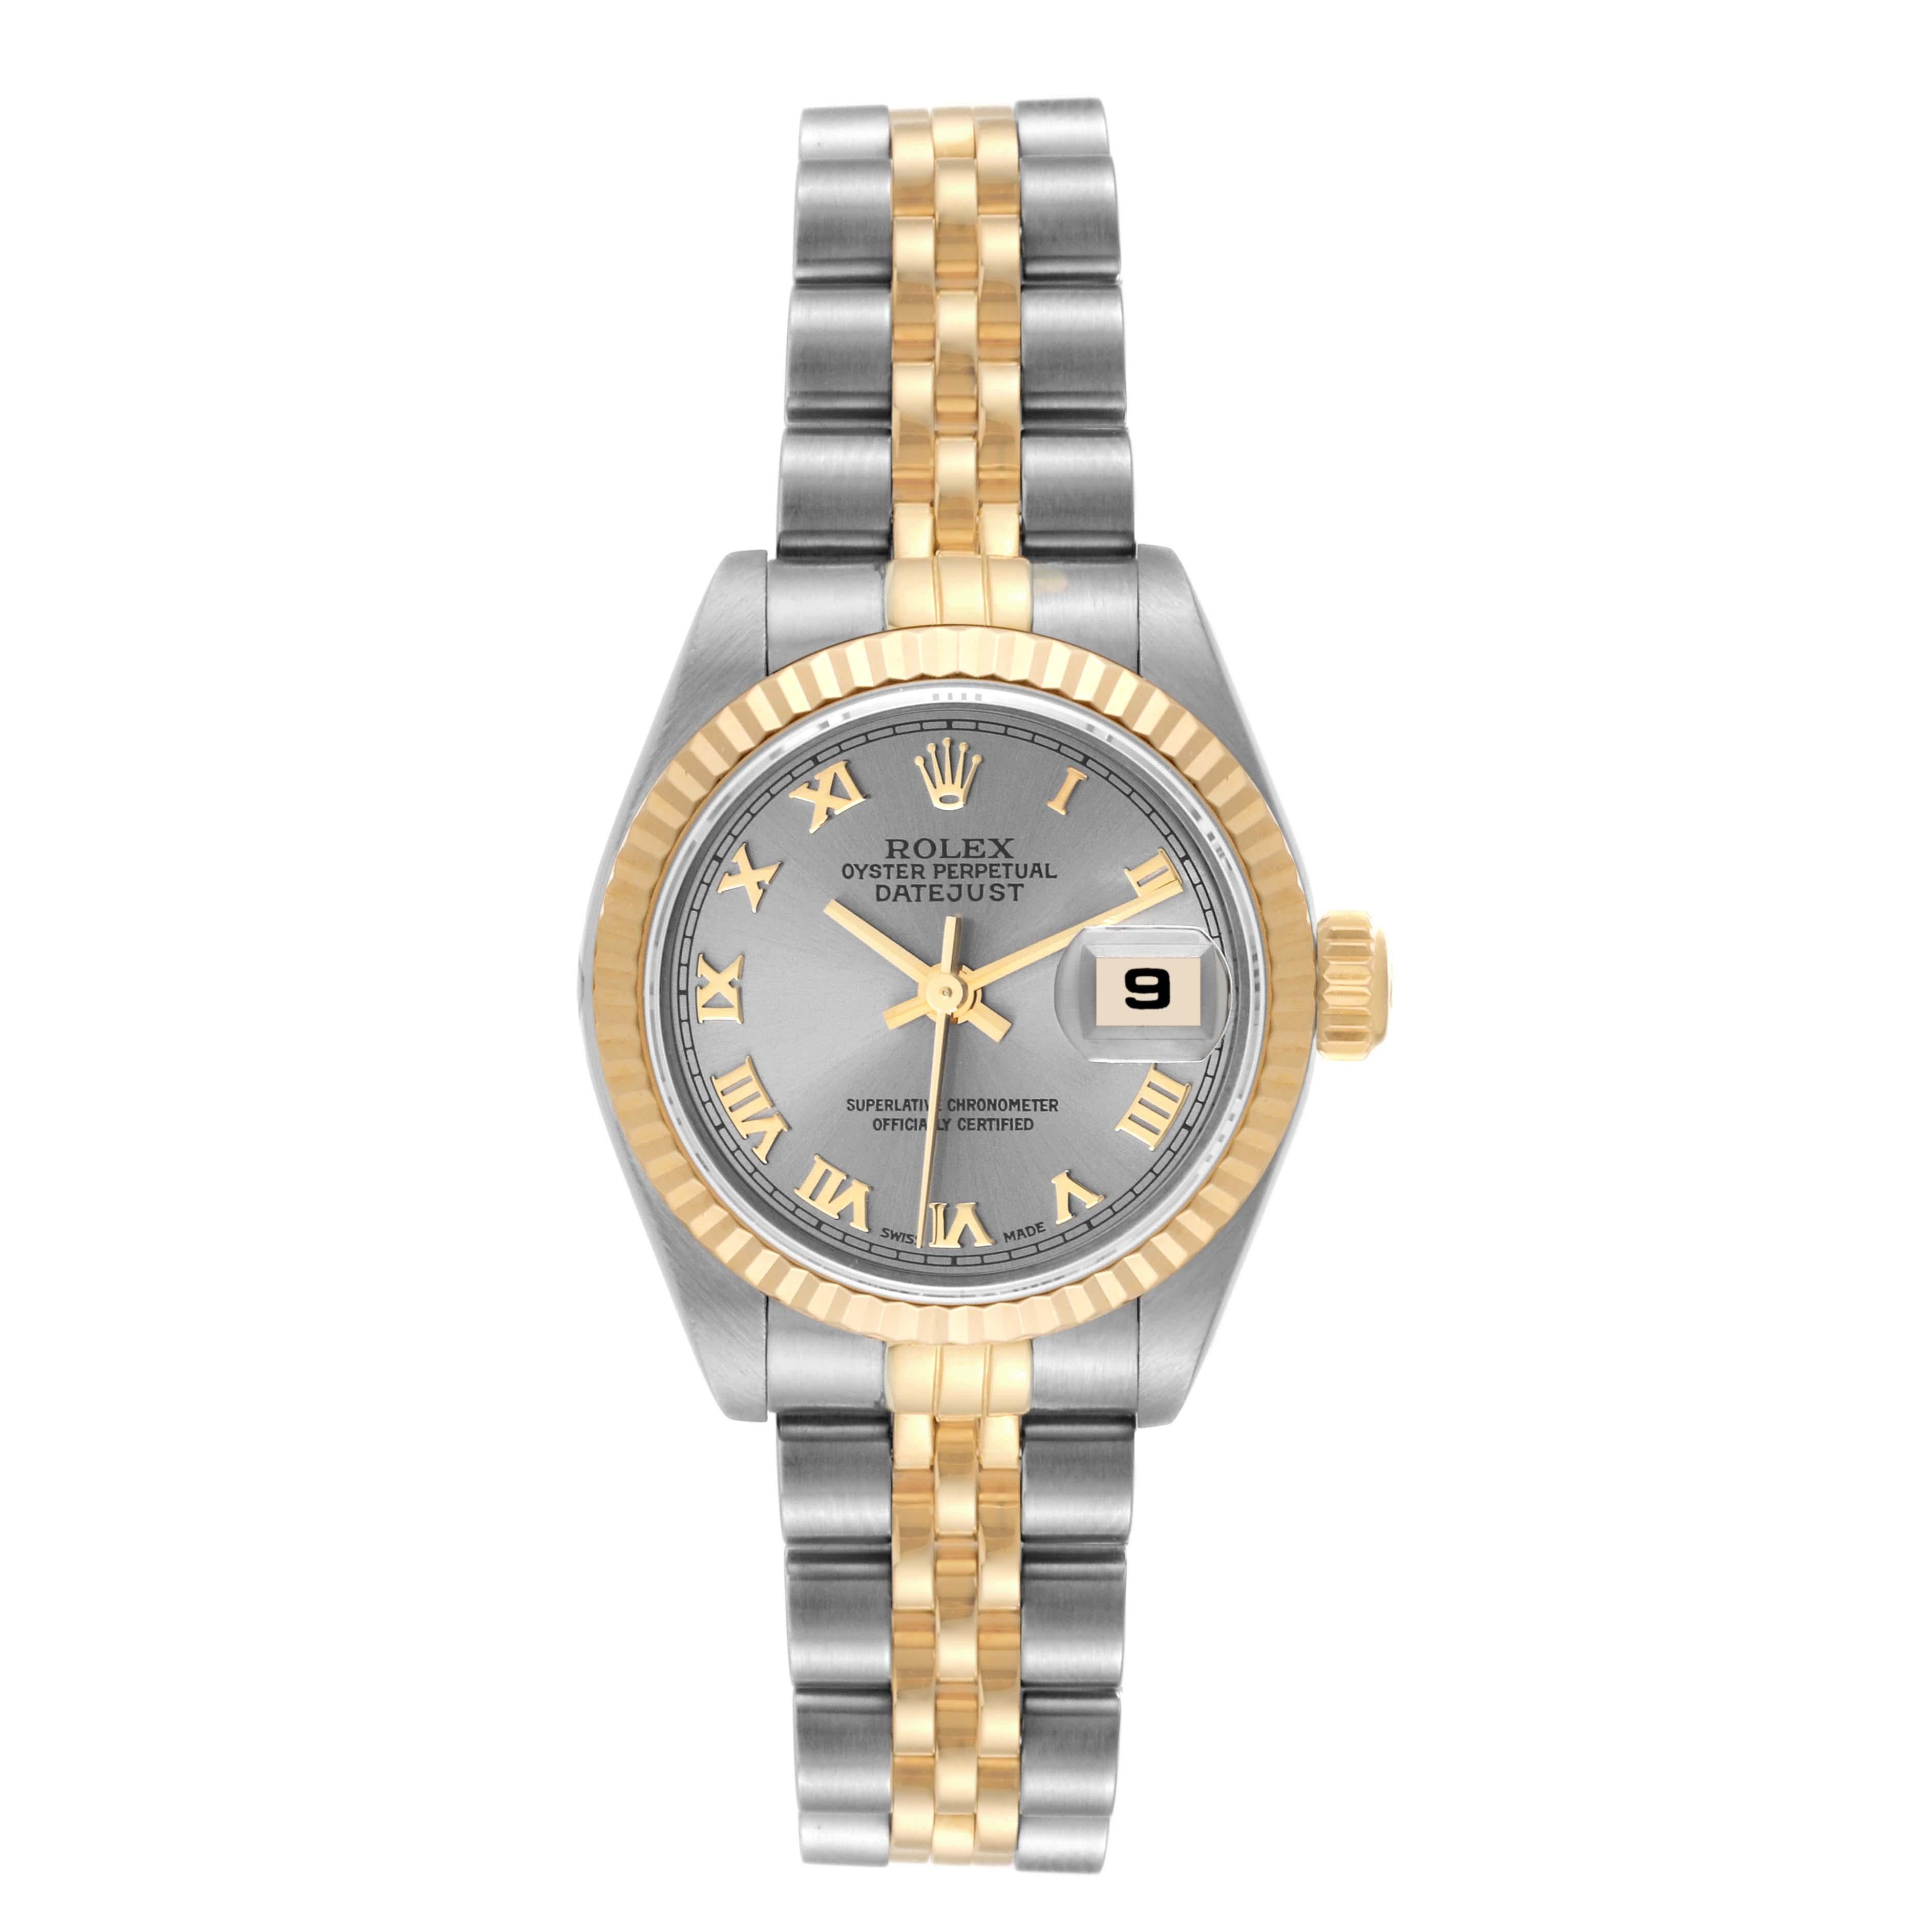 Rolex Datejust Steel Yellow Gold Slate Roman Dial Ladies Watch 79173. Officially certified chronometer automatic self-winding movement with quickset date function. Stainless steel oyster case 26.0 mm in diameter. Rolex logo on an 18K yellow gold